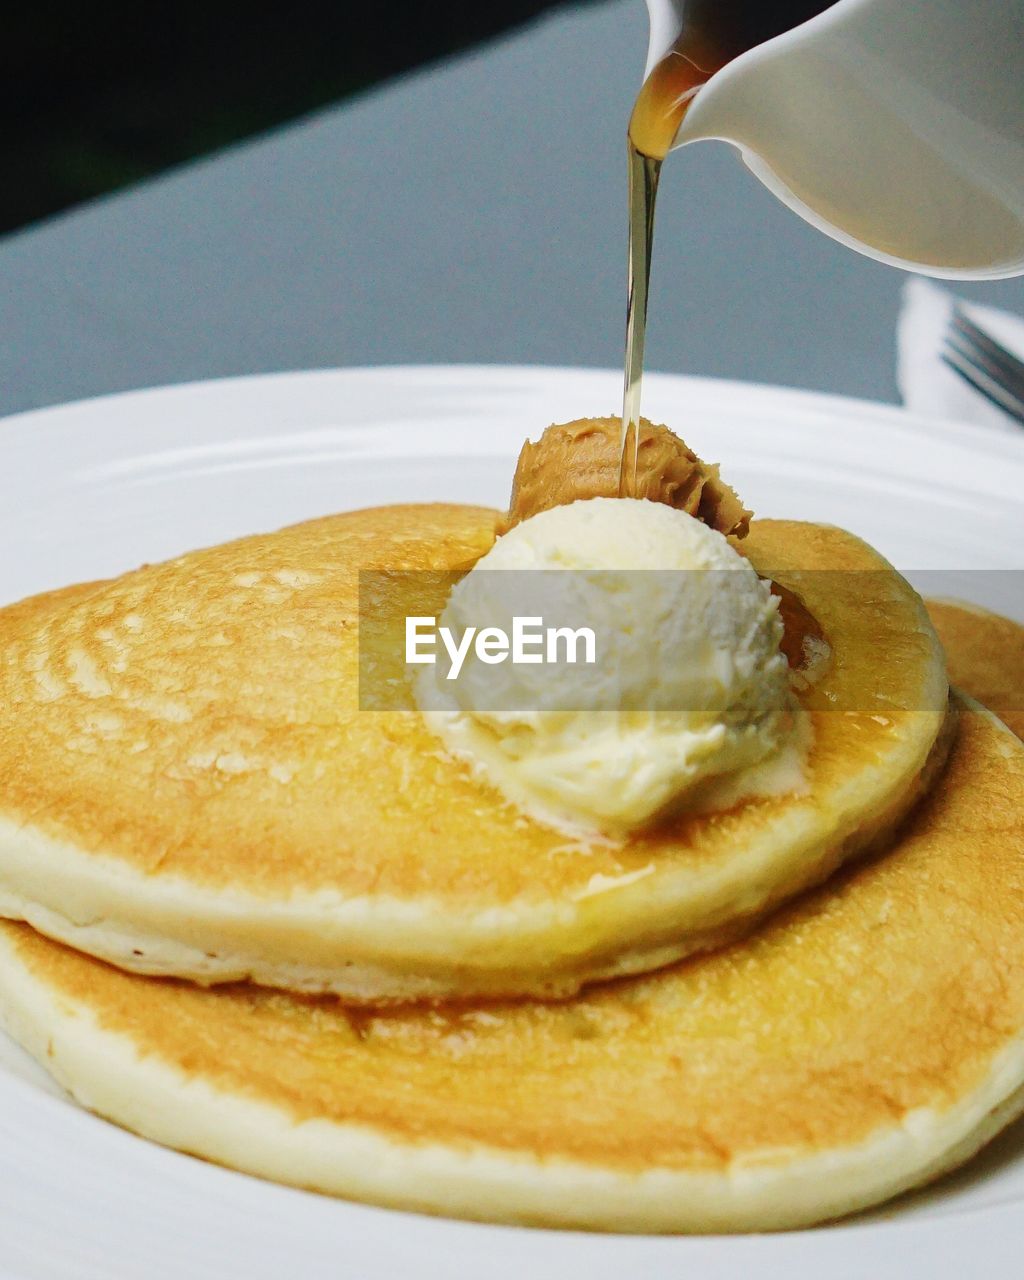 Syrup pouring on pancakes in plate